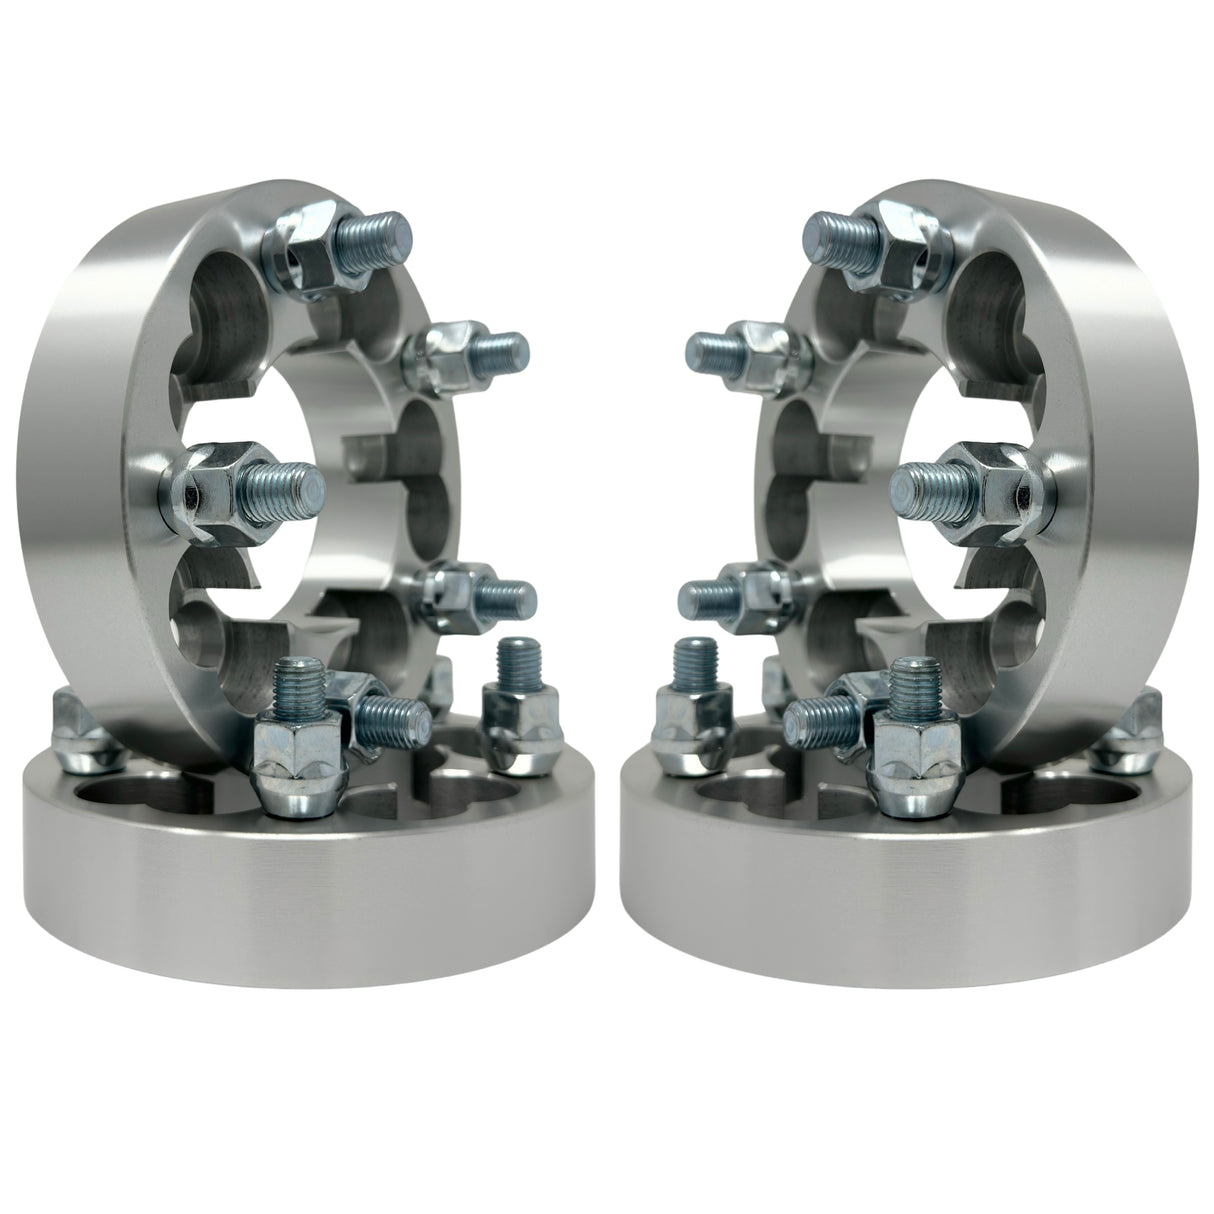 5x110 or 5x112 to 5x114.3 (Aka 5x4.5) Wheel Adapters Universal Kit 1.25" Inch Thick (32mm) 12x1.5 Studs & Lug Nuts 74mm Center Bore For All Hub Clearance